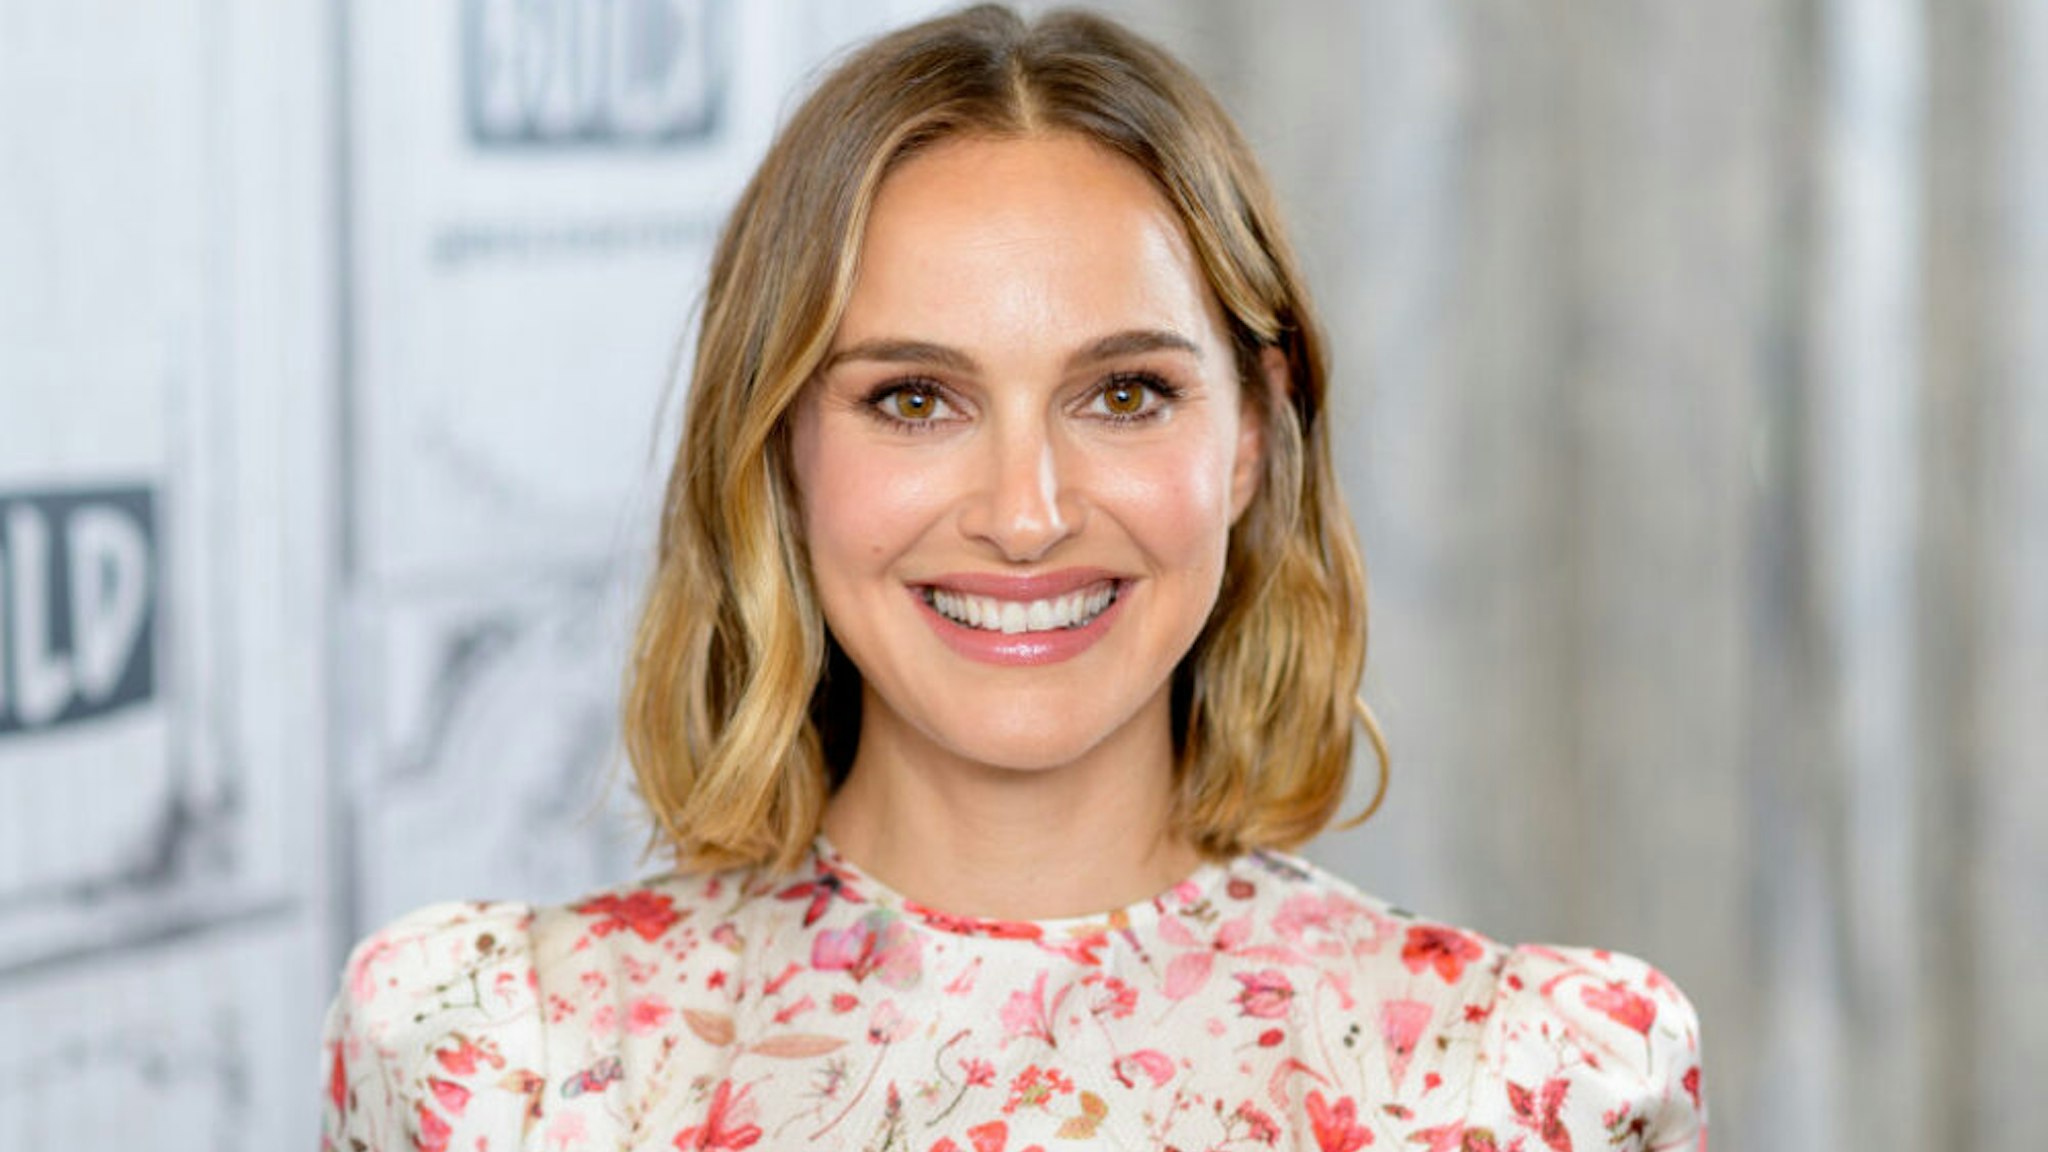 NEW YORK, NEW YORK - OCTOBER 02: Actress Natalie Portman discusses "Lucy in the Sky" with the Build Series at Build Studio on October 02, 2019 in New York City.